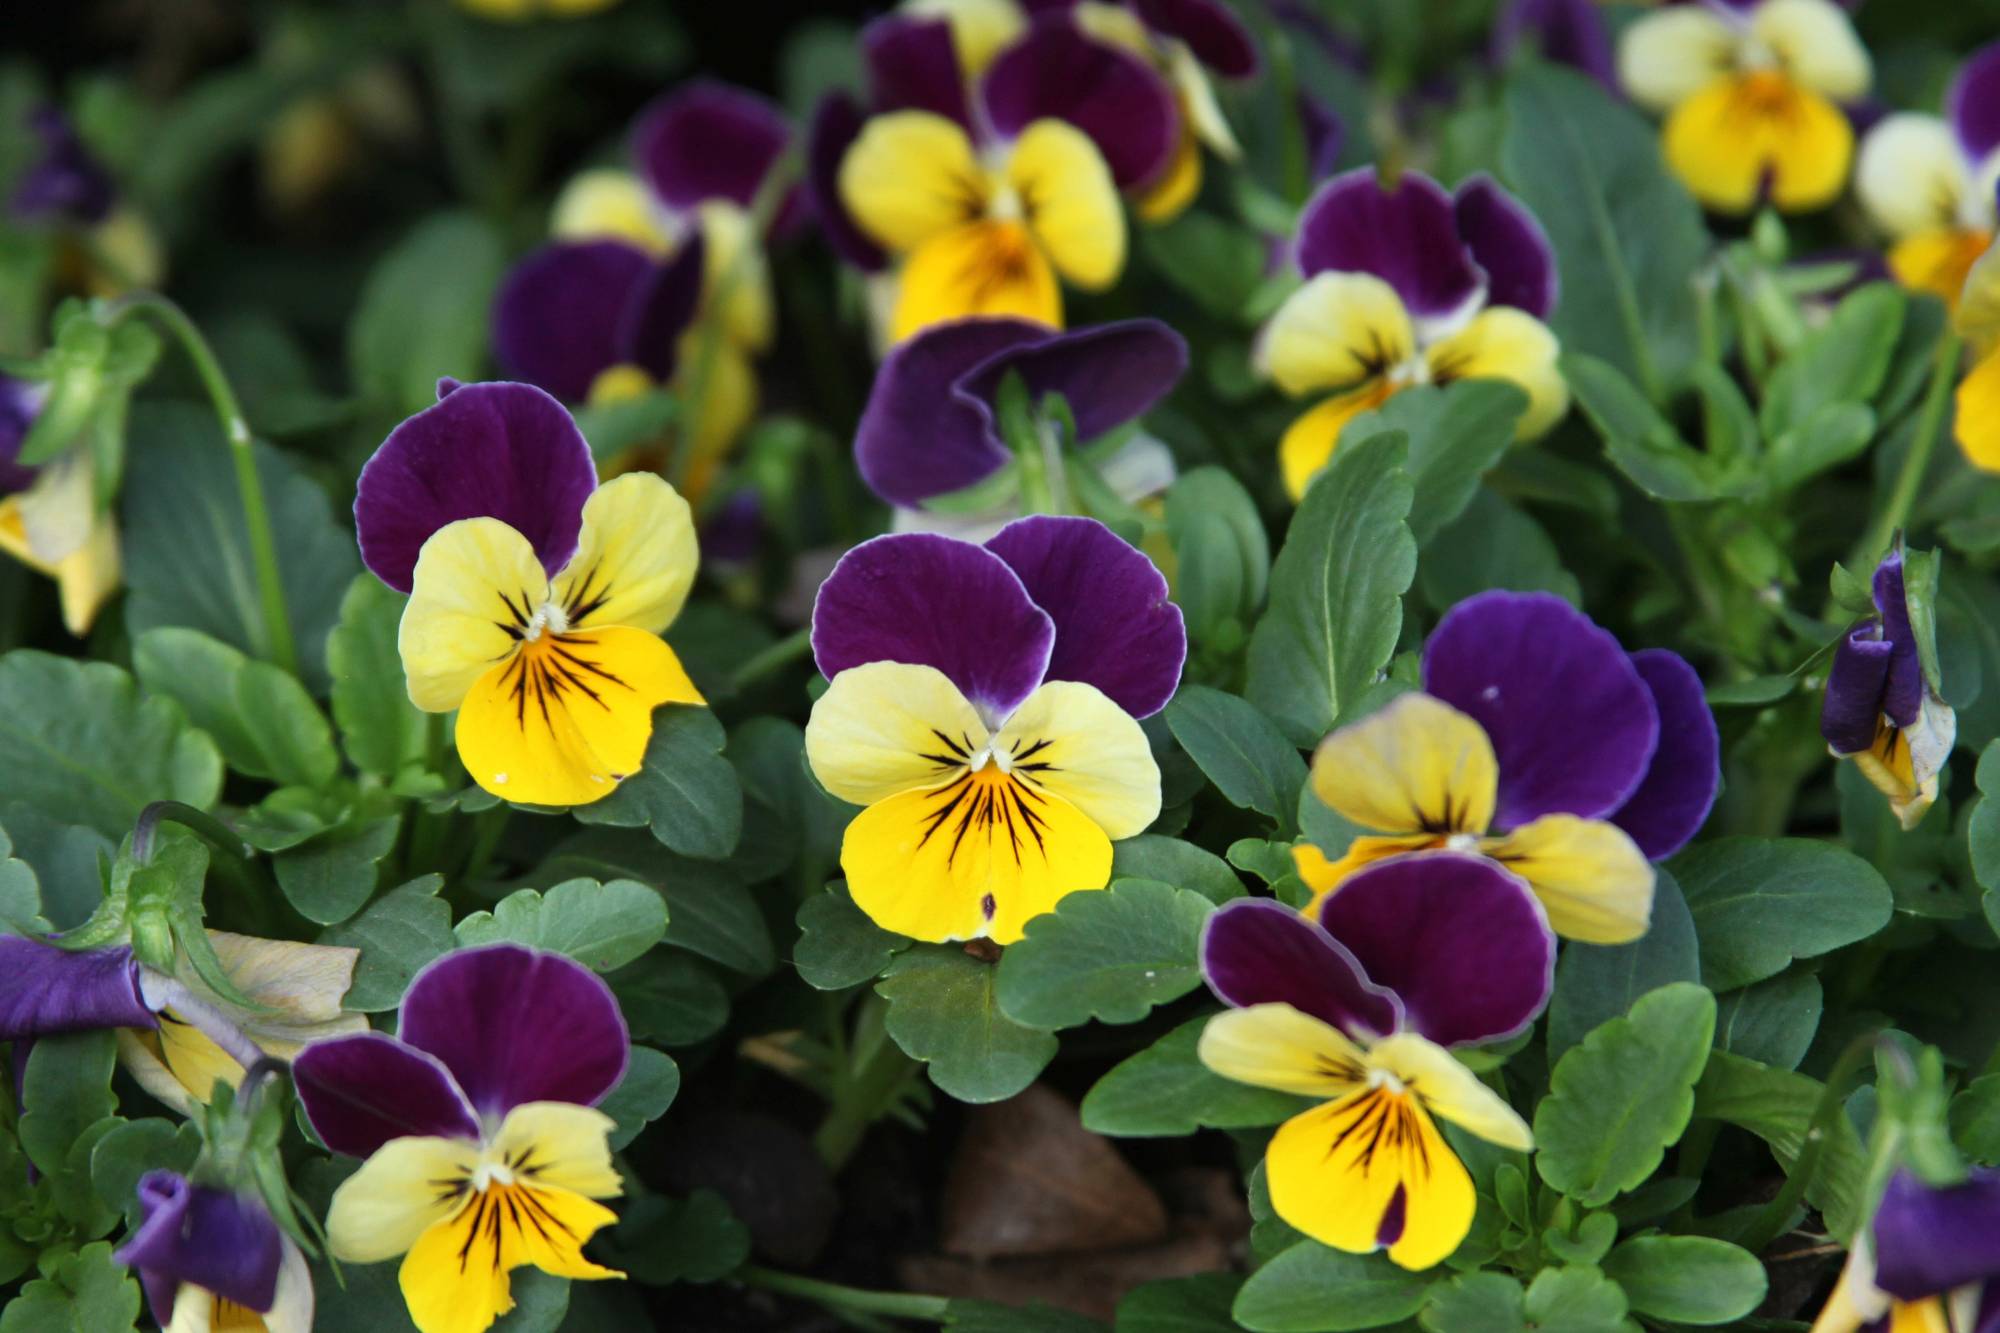 Pansies: Why the Arboretum Looks Beautiful Even During the Deepest Cold